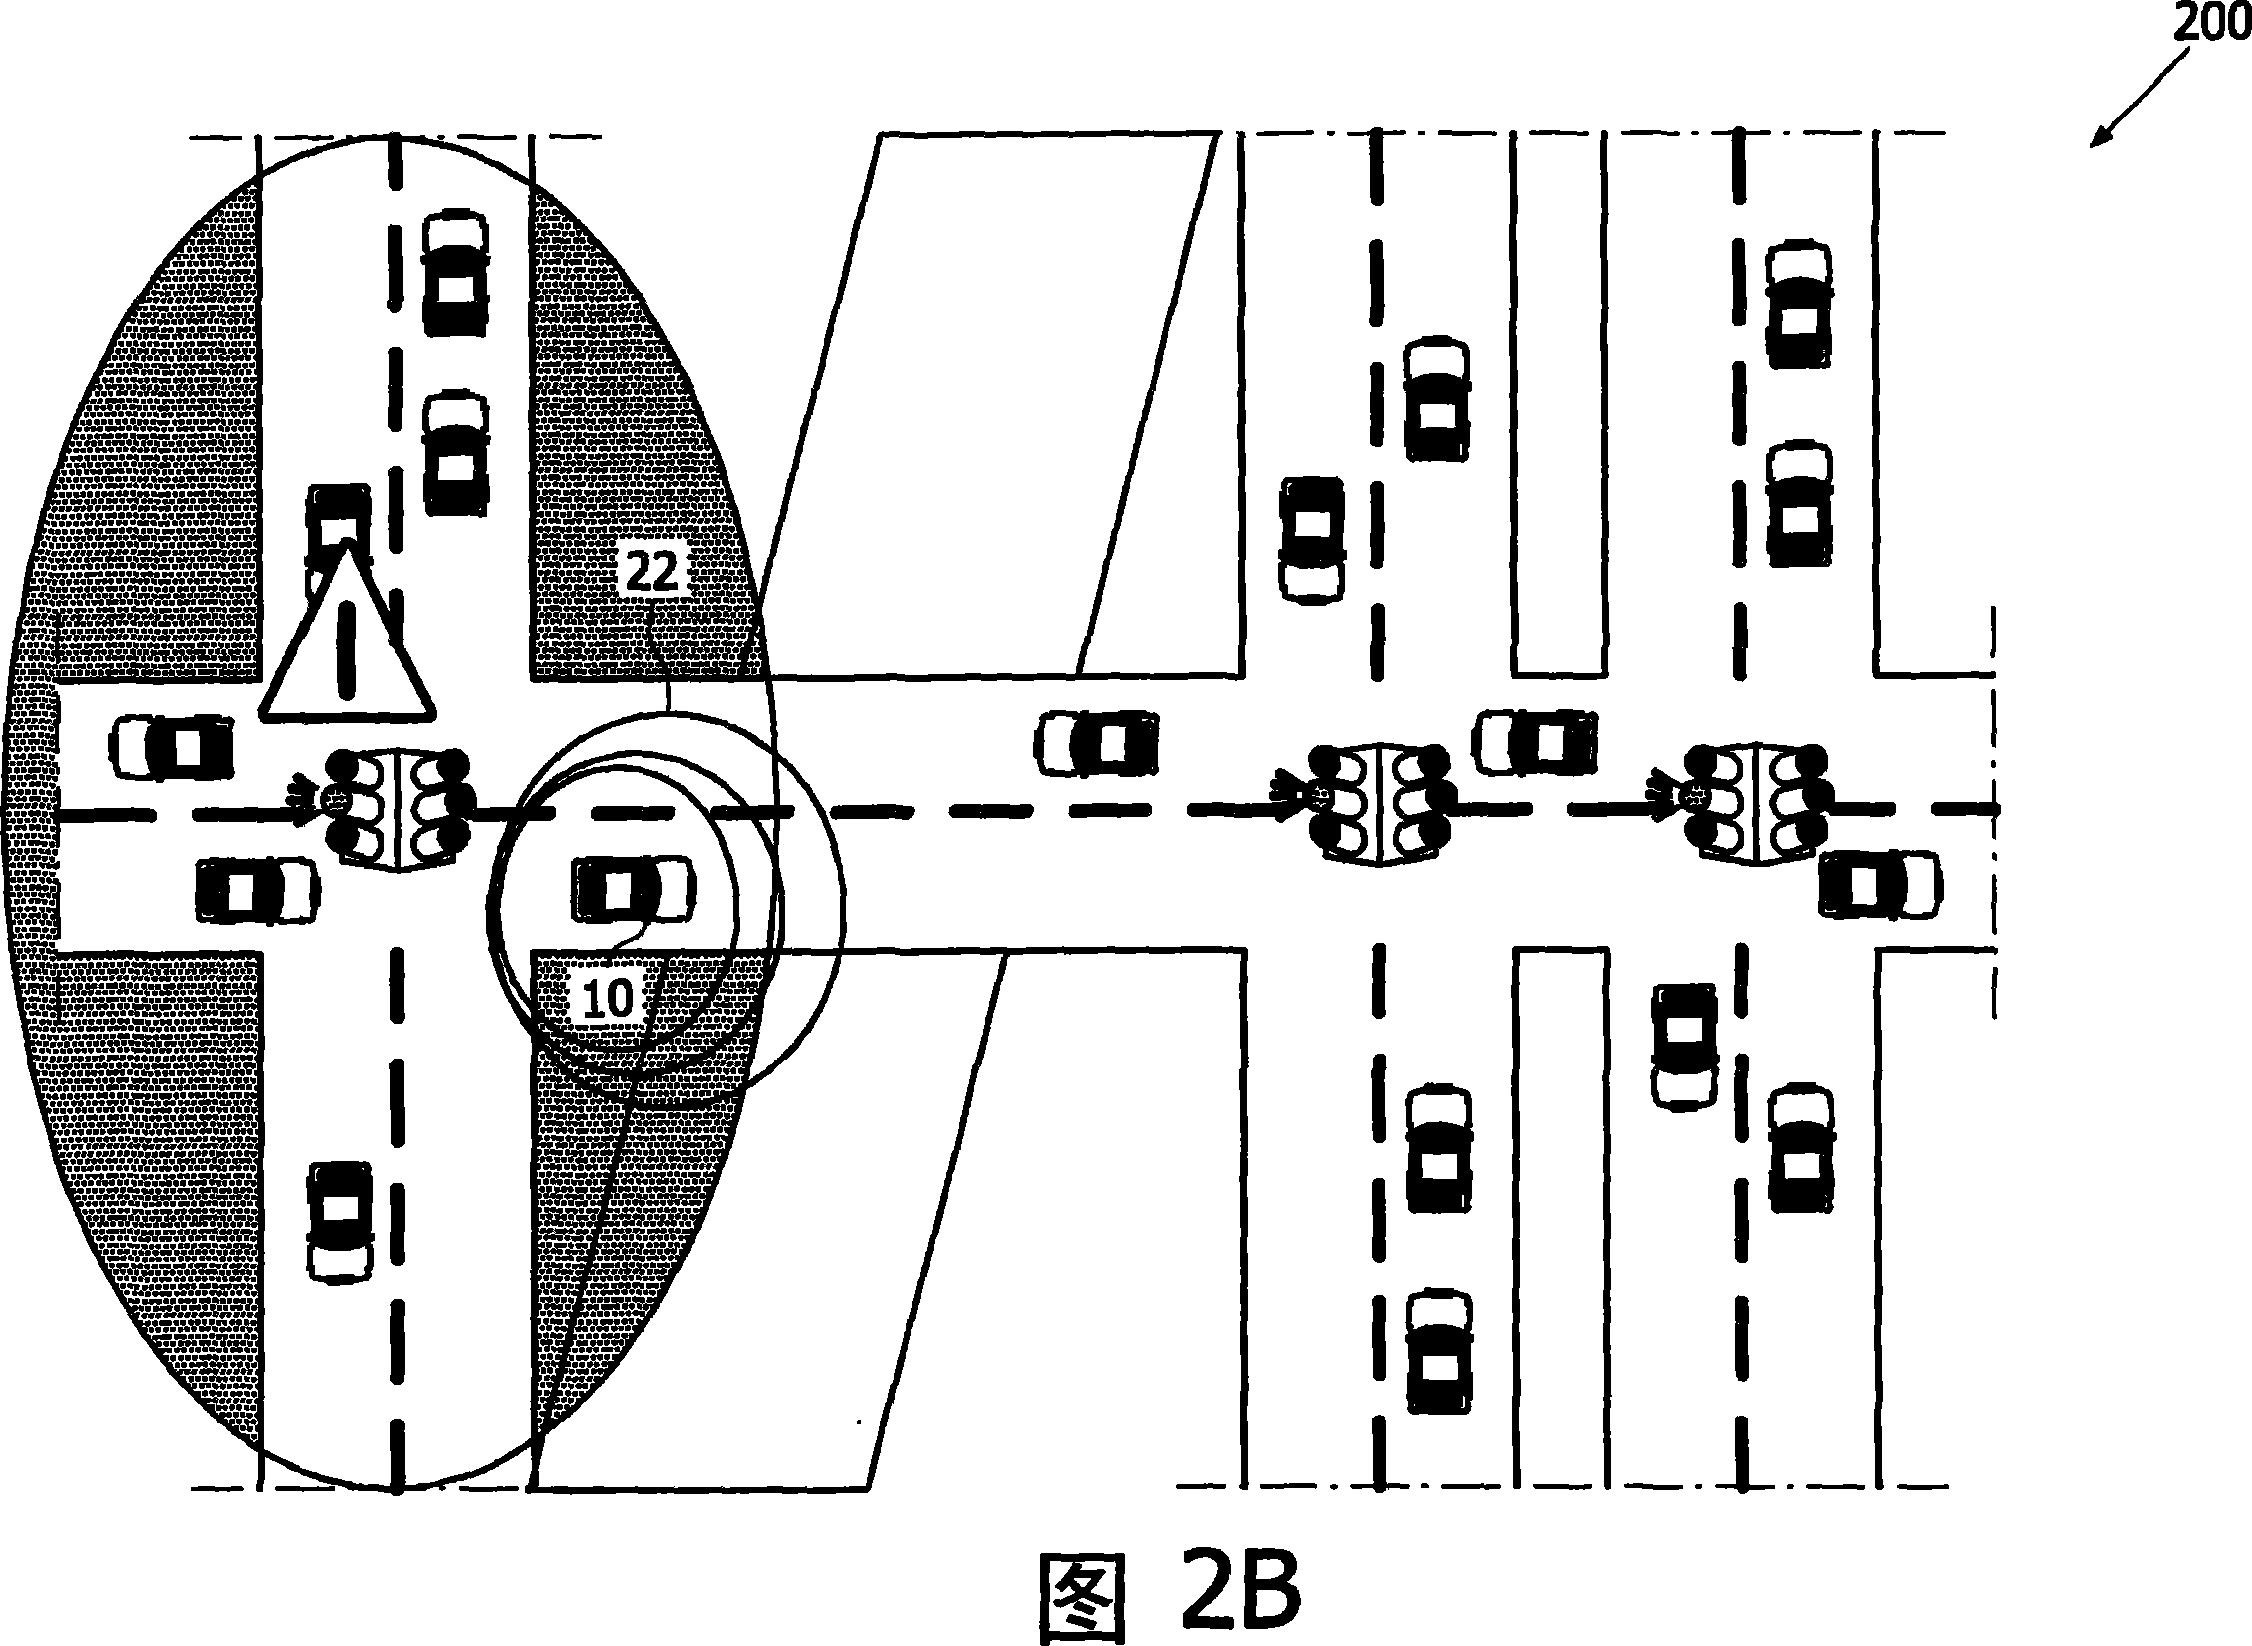 Communication device and communication system as well as method of communication between and among mobile nodes such as vehicles